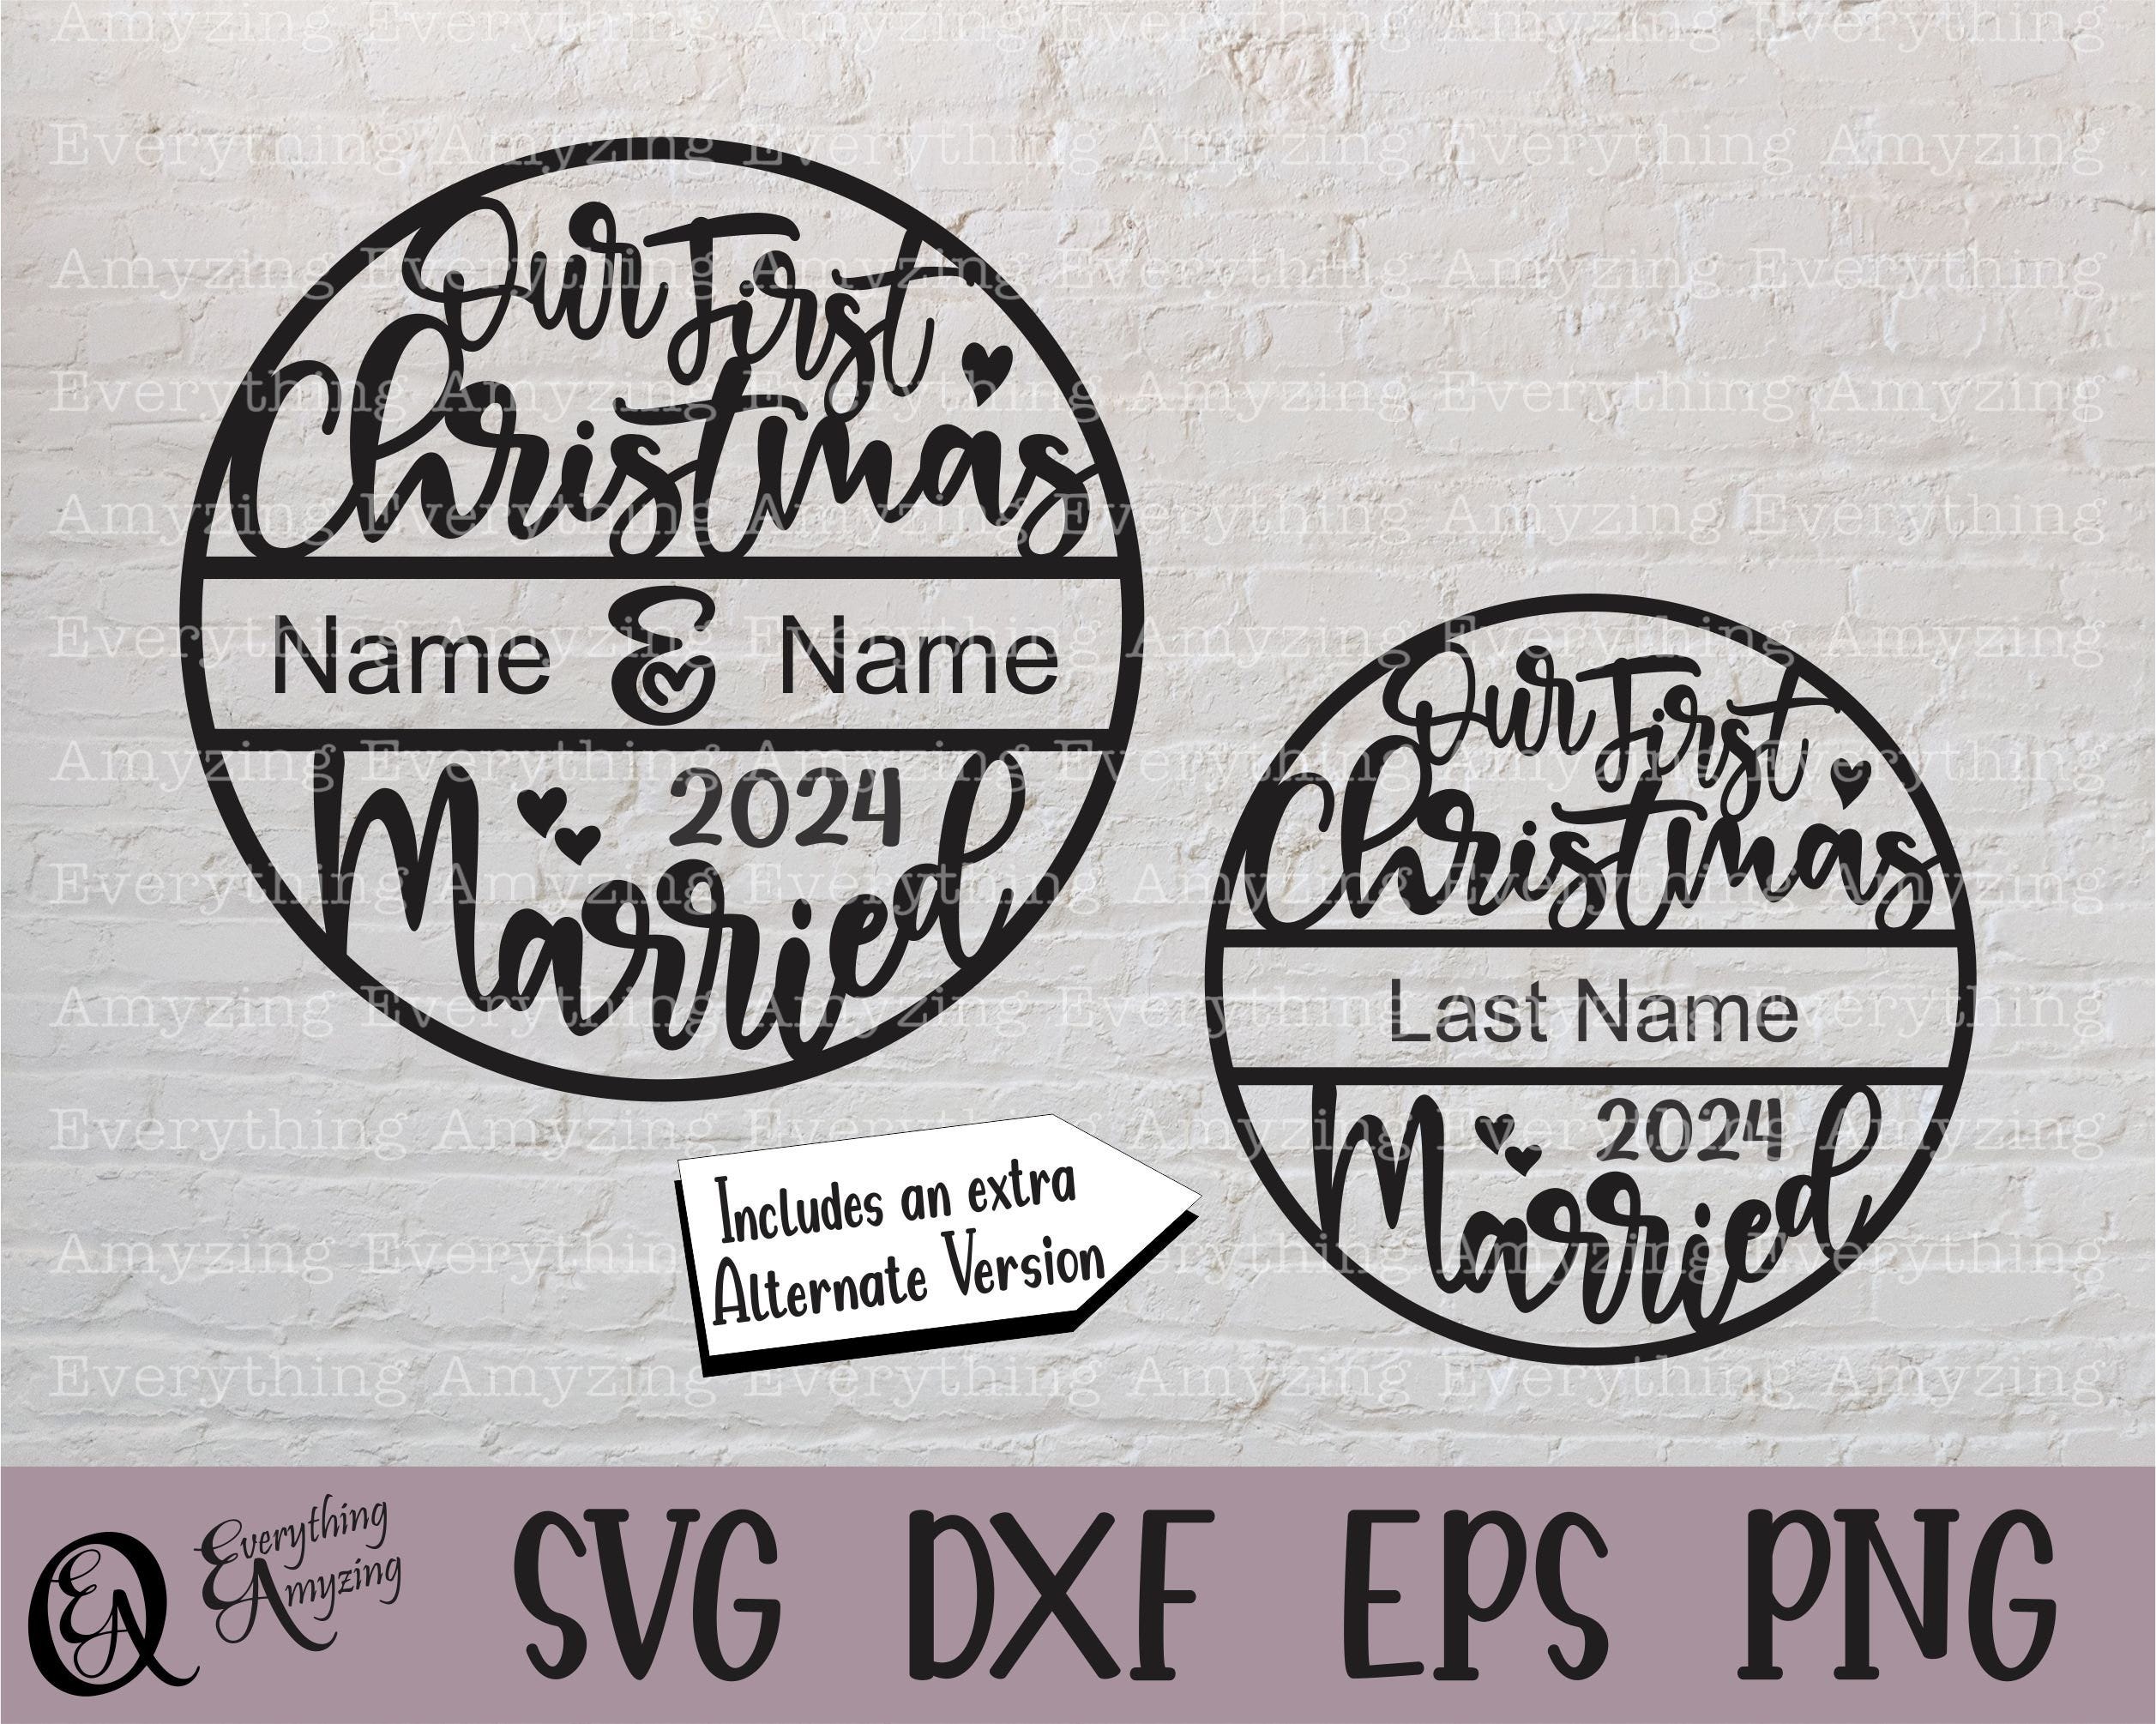 Our First Christmas Married Ornament svg, Married in 2024 Ornament, Newlyweds Ornament svg, Married, Cricut, Silhouette, svg, png, eps, dxf